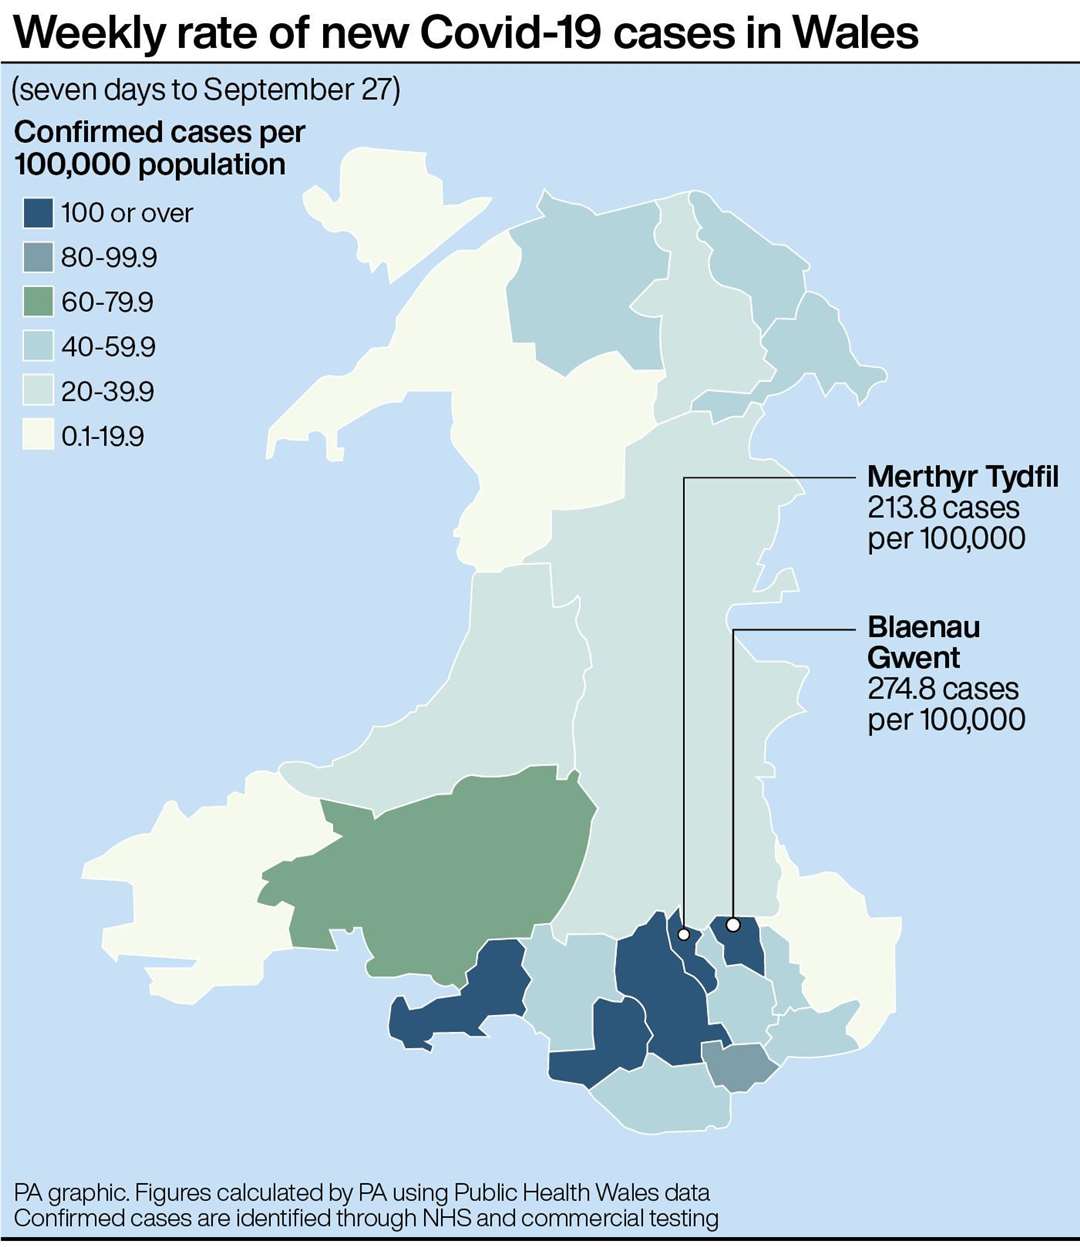 Weekly rate of new Covid-19 cases in Wales (PA Graphics)